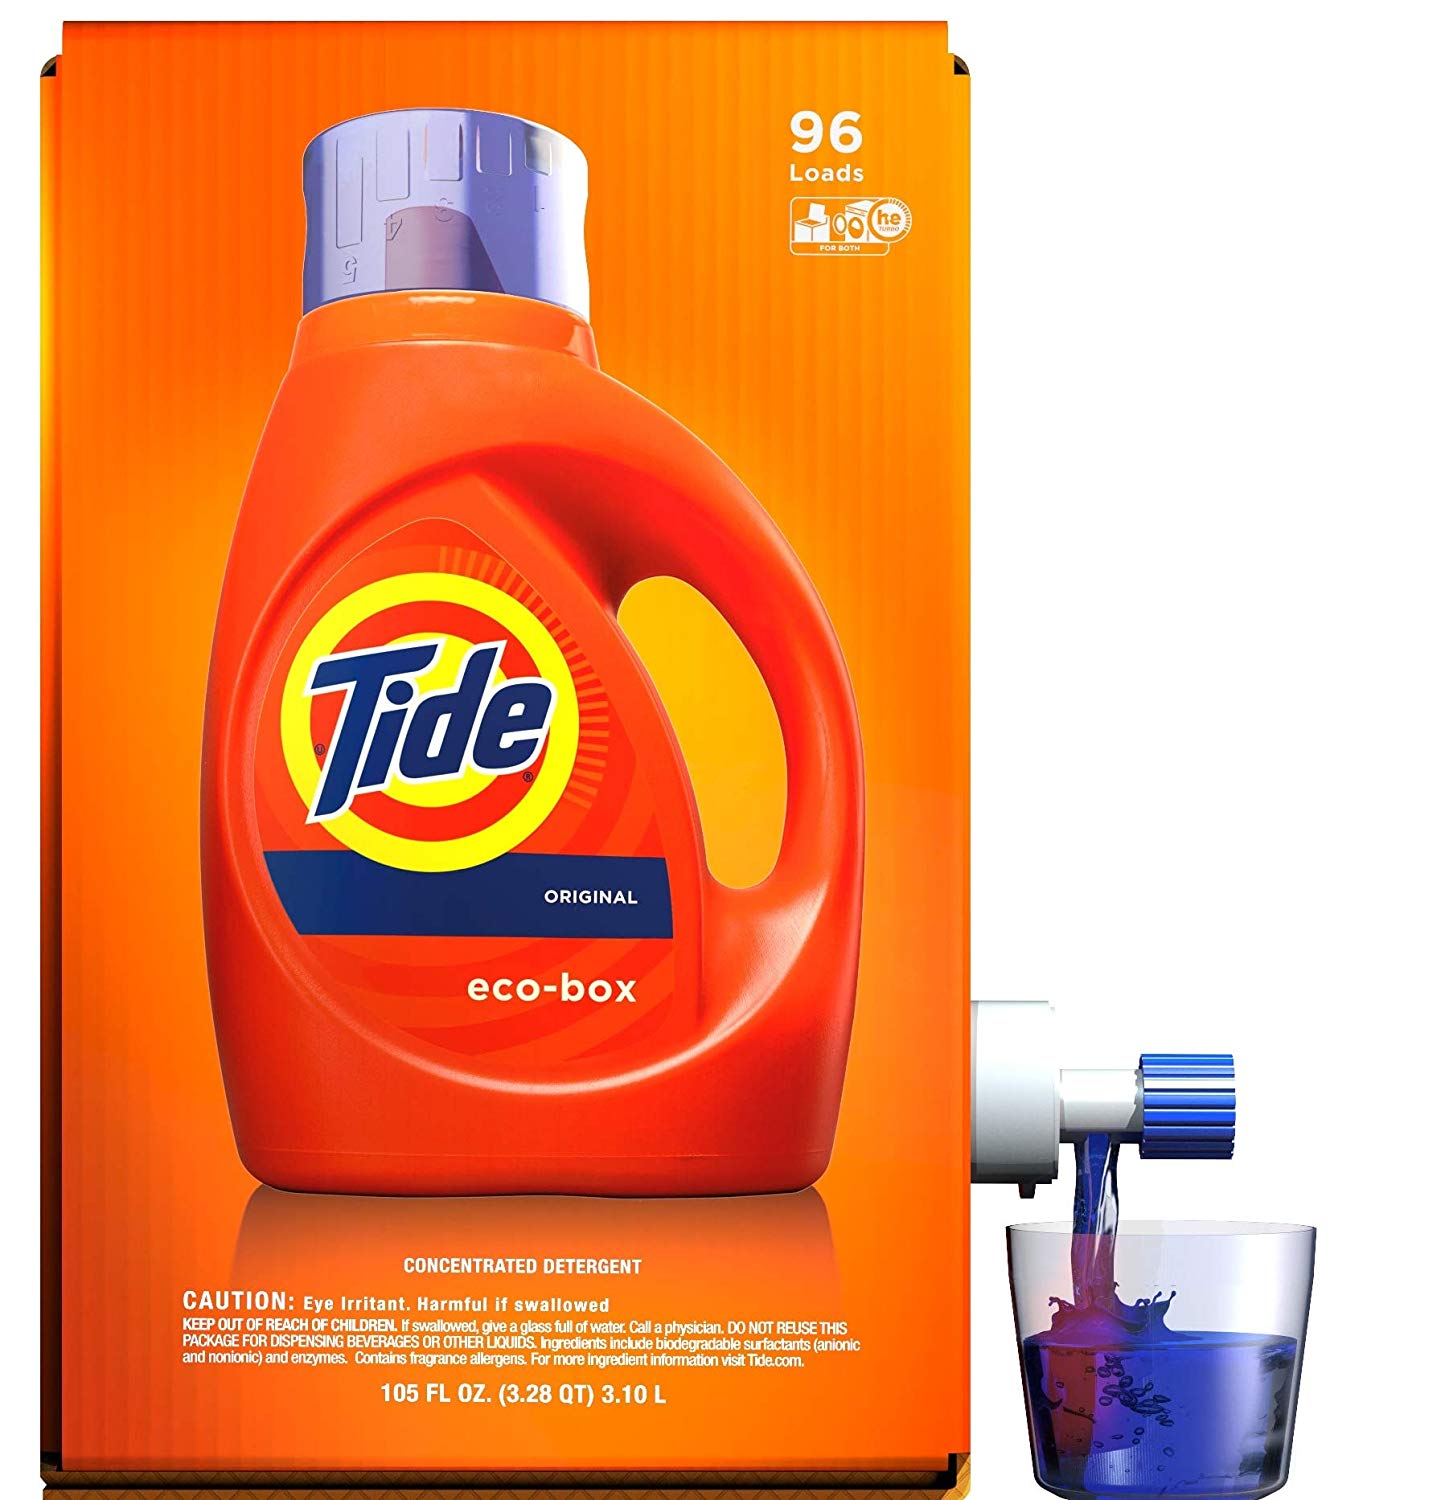 tide-laundry-detergent-liquid-eco-box-concentrated-original-scent-96-loads-as-low-as-11-66